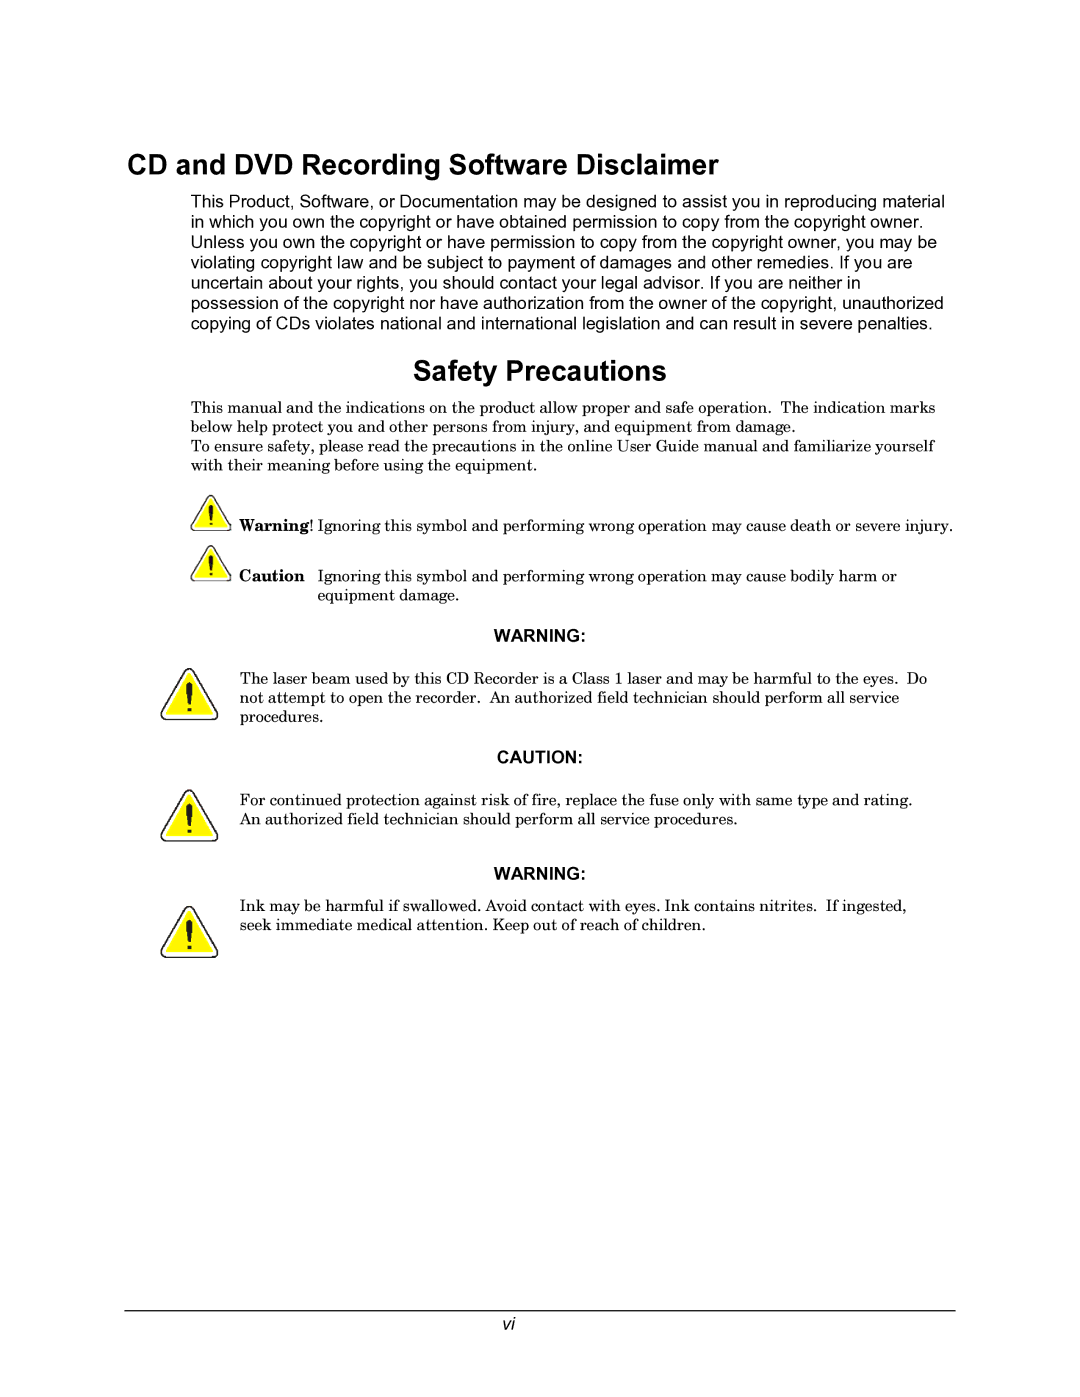 Rimage 110716-000 manual CD and DVD Recording Software Disclaimer, Safety Precautions 